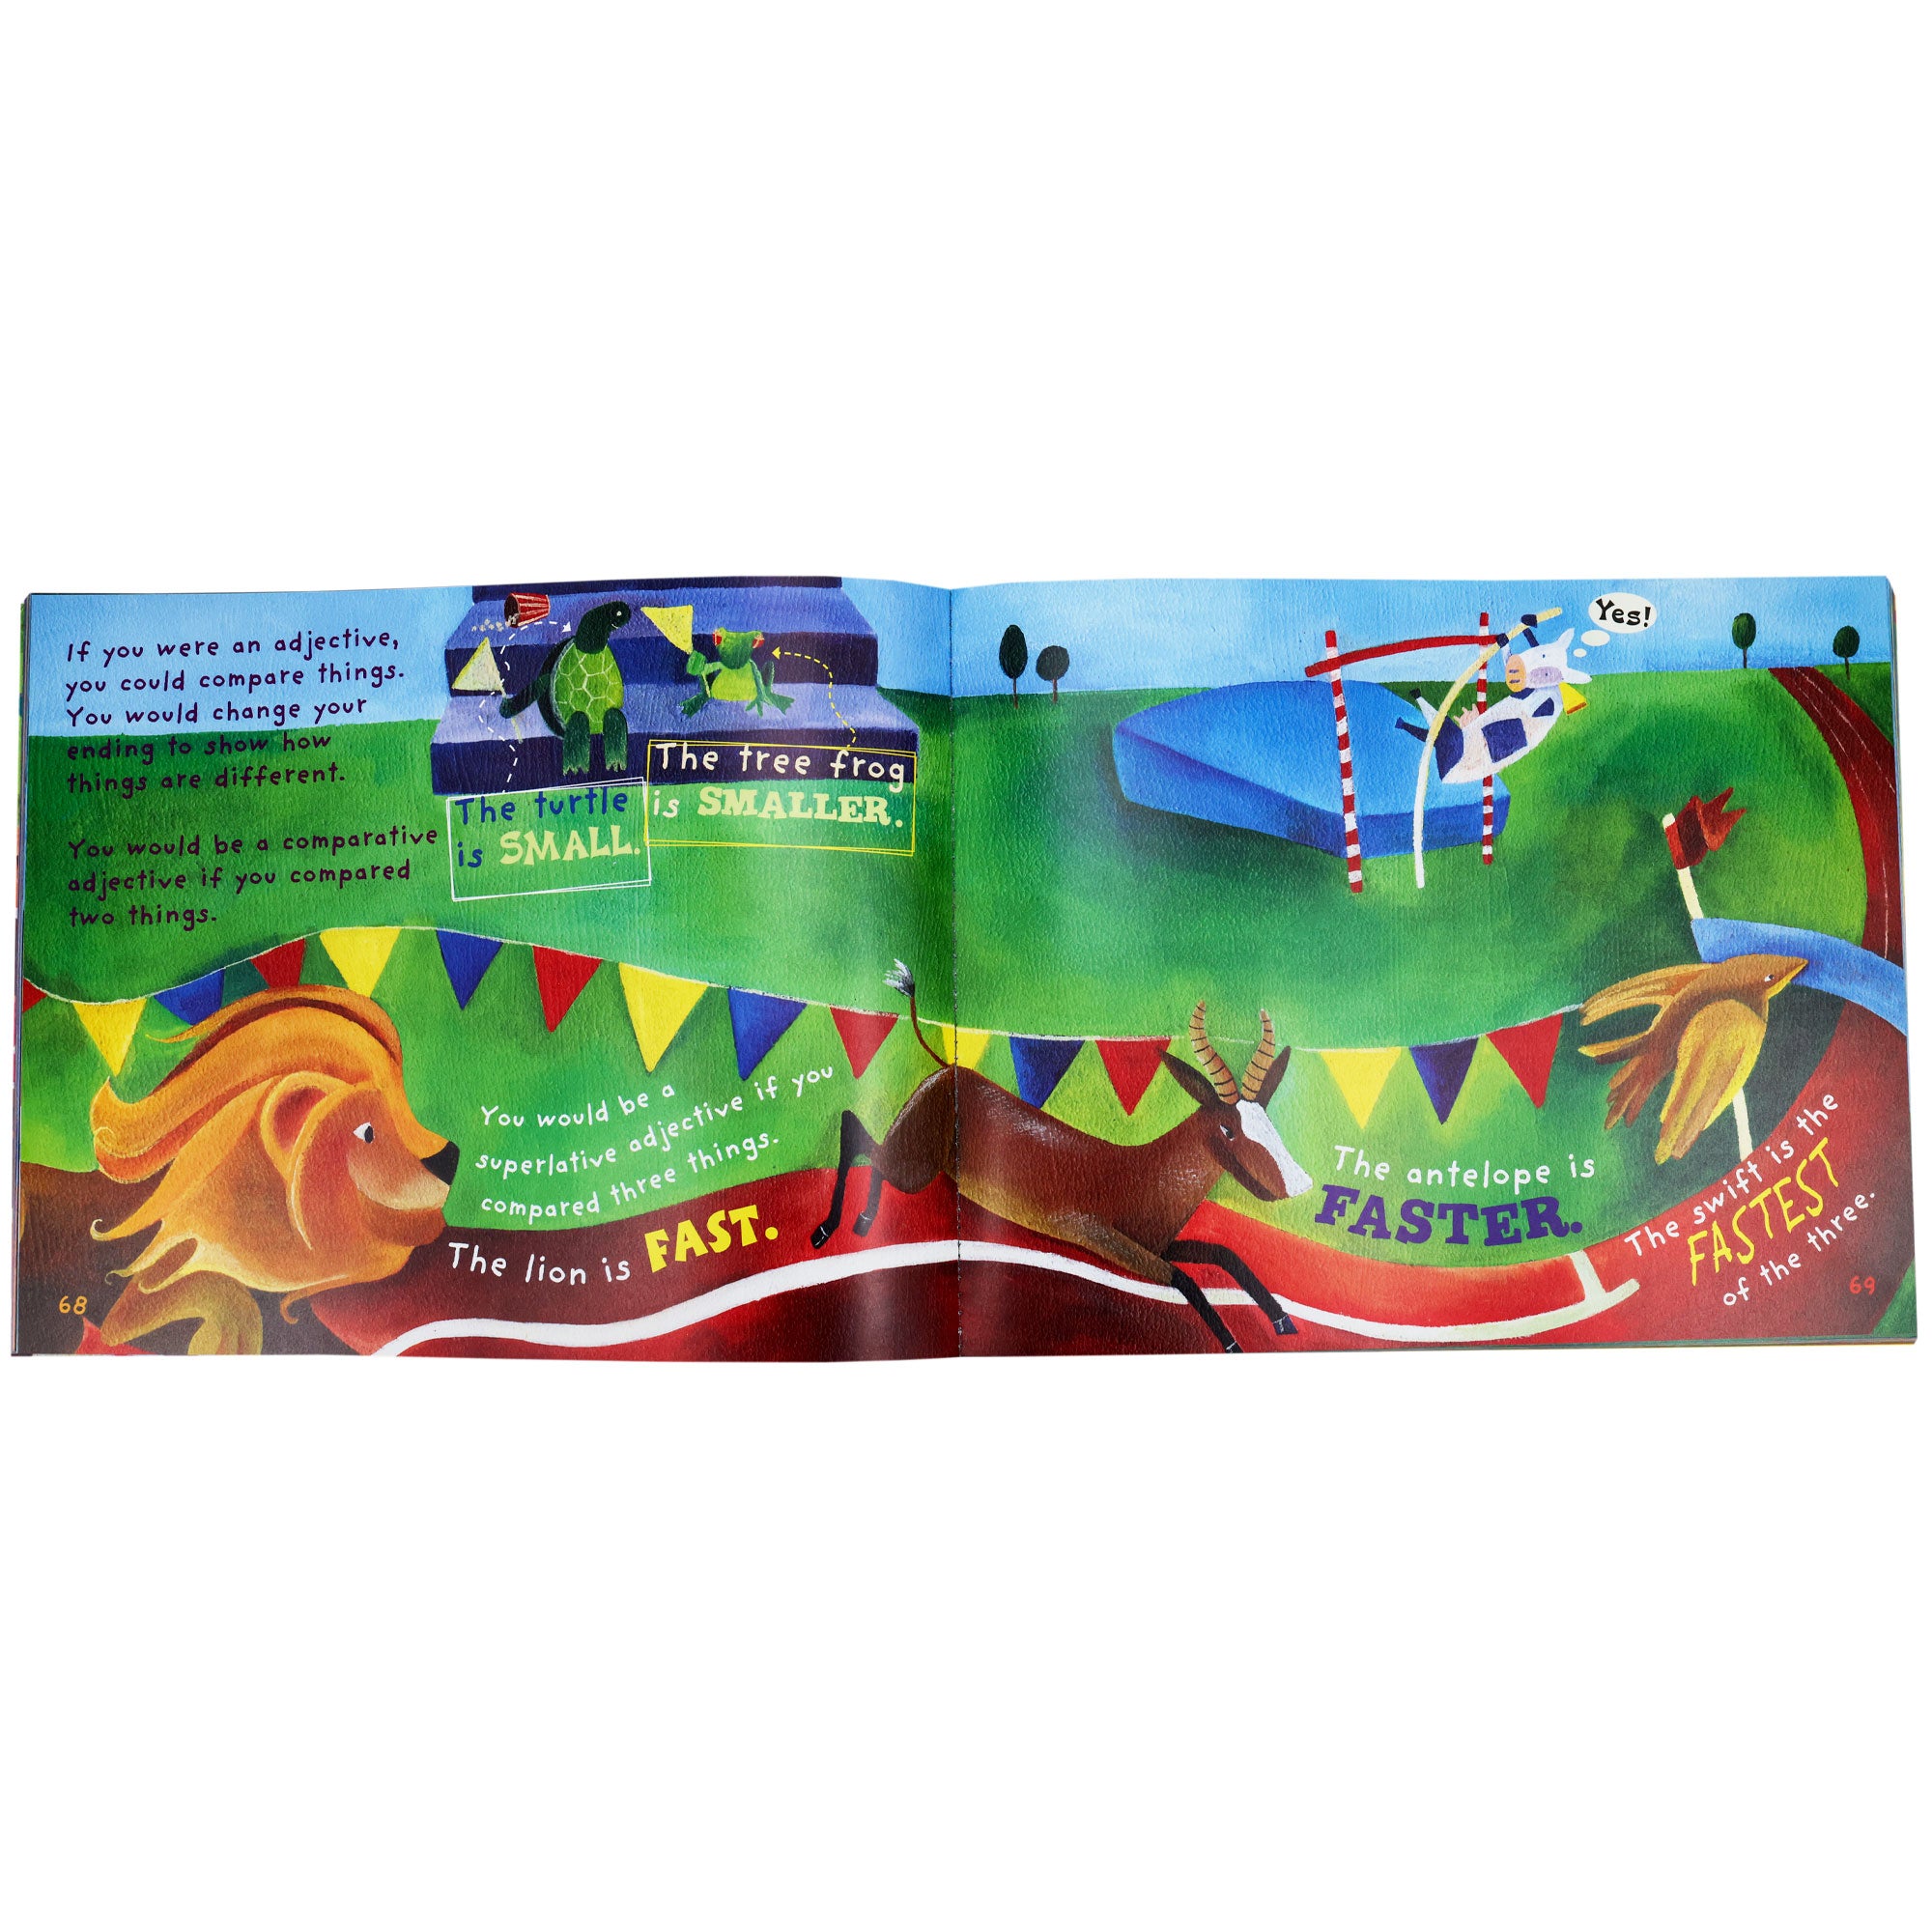 Word Fun book open to show inside pages. The spread over both pages shows a race between a lion, antelope, and a swift. The adjectives explored on the page are fast, faster, fastest, small, and smaller. You can see a cow pole jumping and a frog and turtle on bleachers in the background. The text in the upper-left reads “If you were an adjective, you could compare things. You would change your ending to show how things are different. You would be a comparative adjective if you compared two things.”